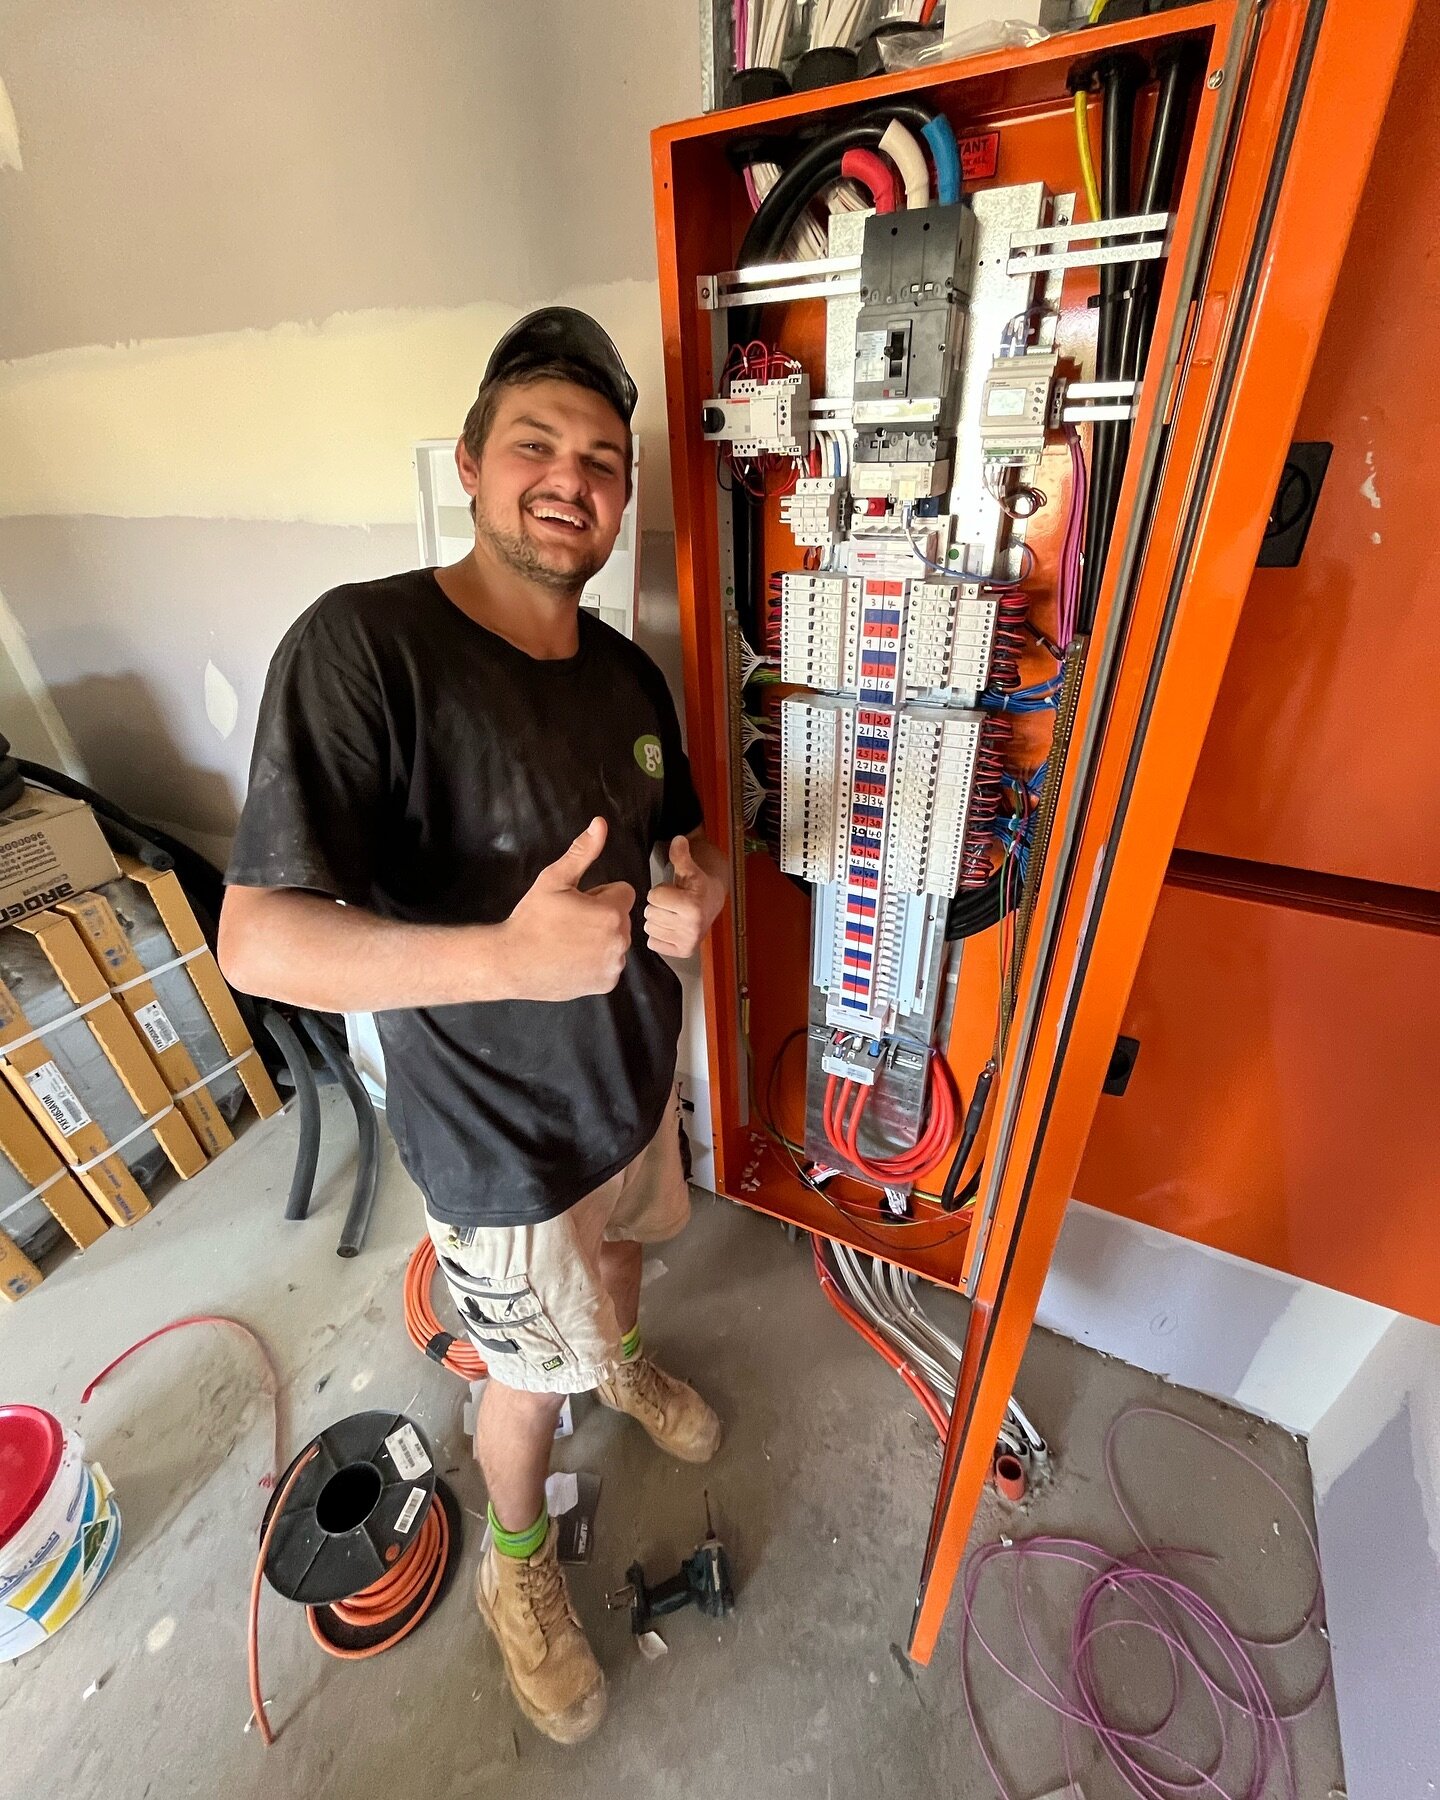 Hamish J and his first Switchboard!
Many more to come for this legend.
We love seeing our staff growing their skills and always learning new things. 
&bull;
&bull;
&bull;
#hallmacelectrical #electricalcontractor #electricalprojects #sparky #skilledtr